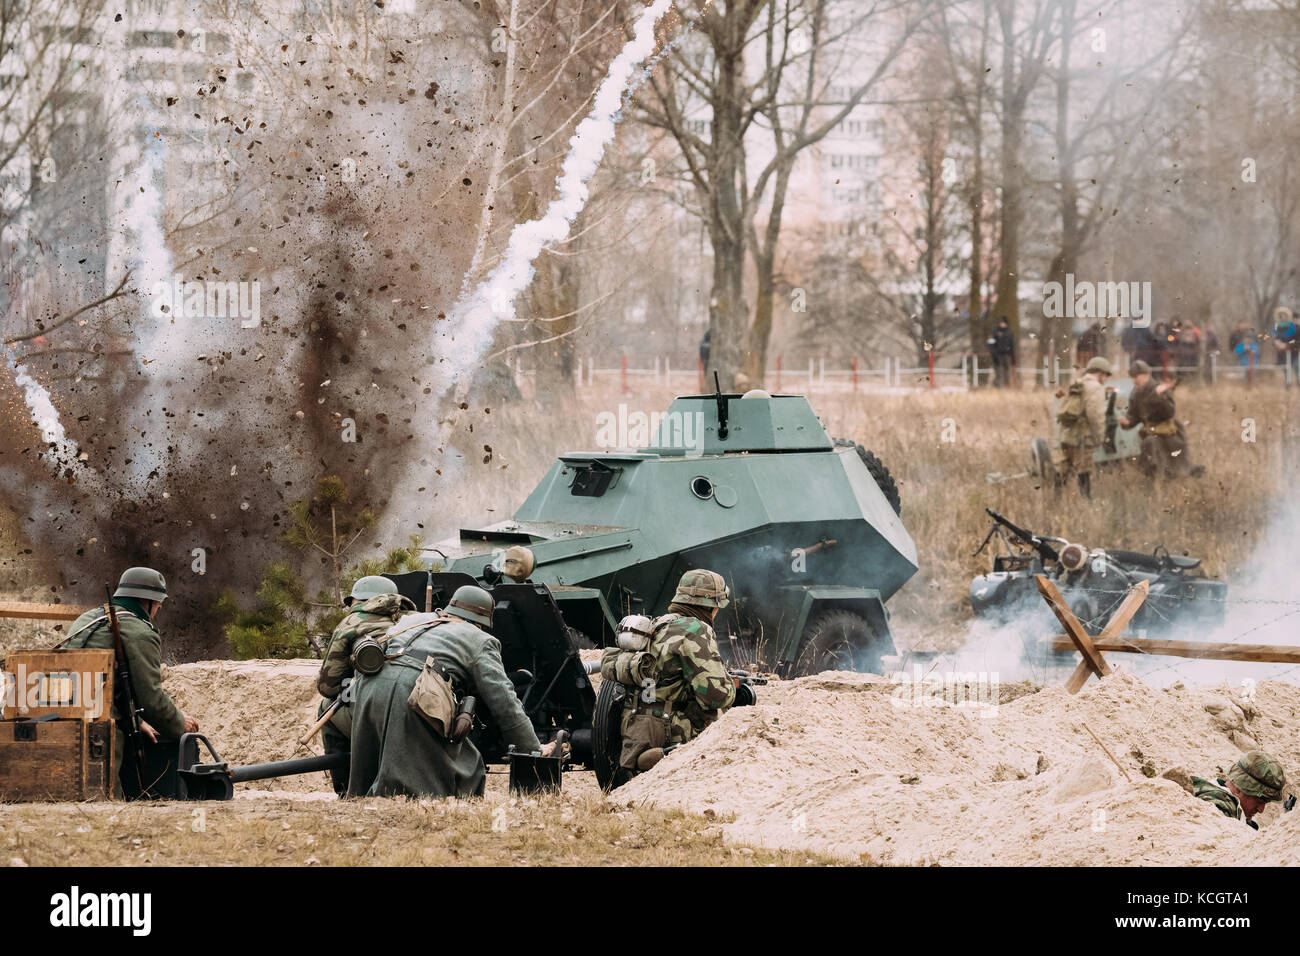 Re-enactors Dressed As German Soldiers In World War II Are Fighting Shooting With A Cannon On The Russian Soviet Armored Car During Historical Reenact Stock Photo